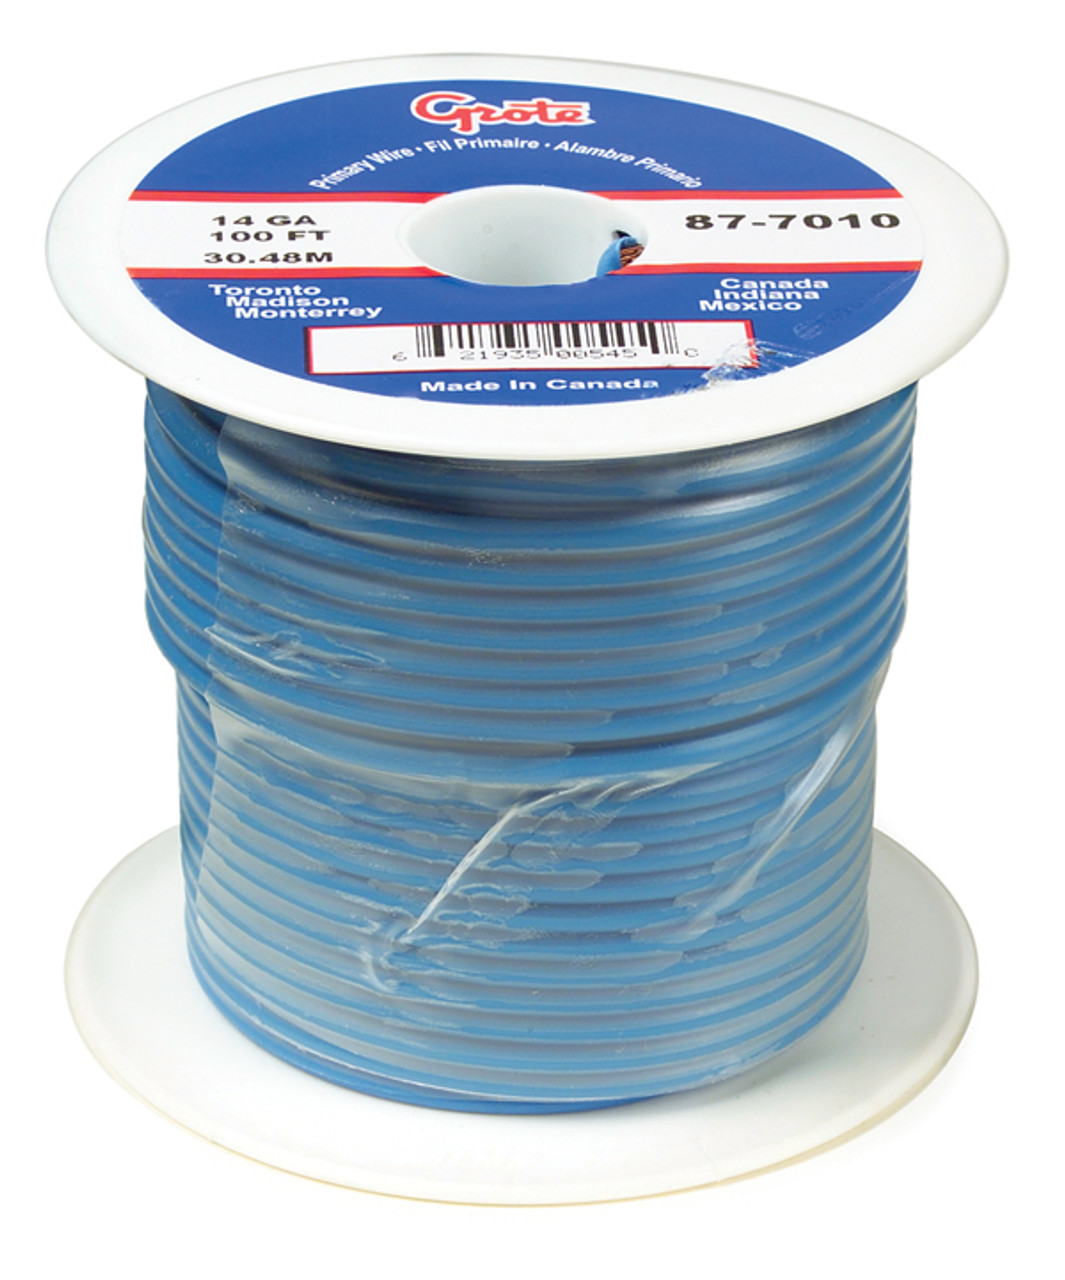 16 AWG General Purpose Thermo Plastic Wire @ 1000' - Blue  88-8010